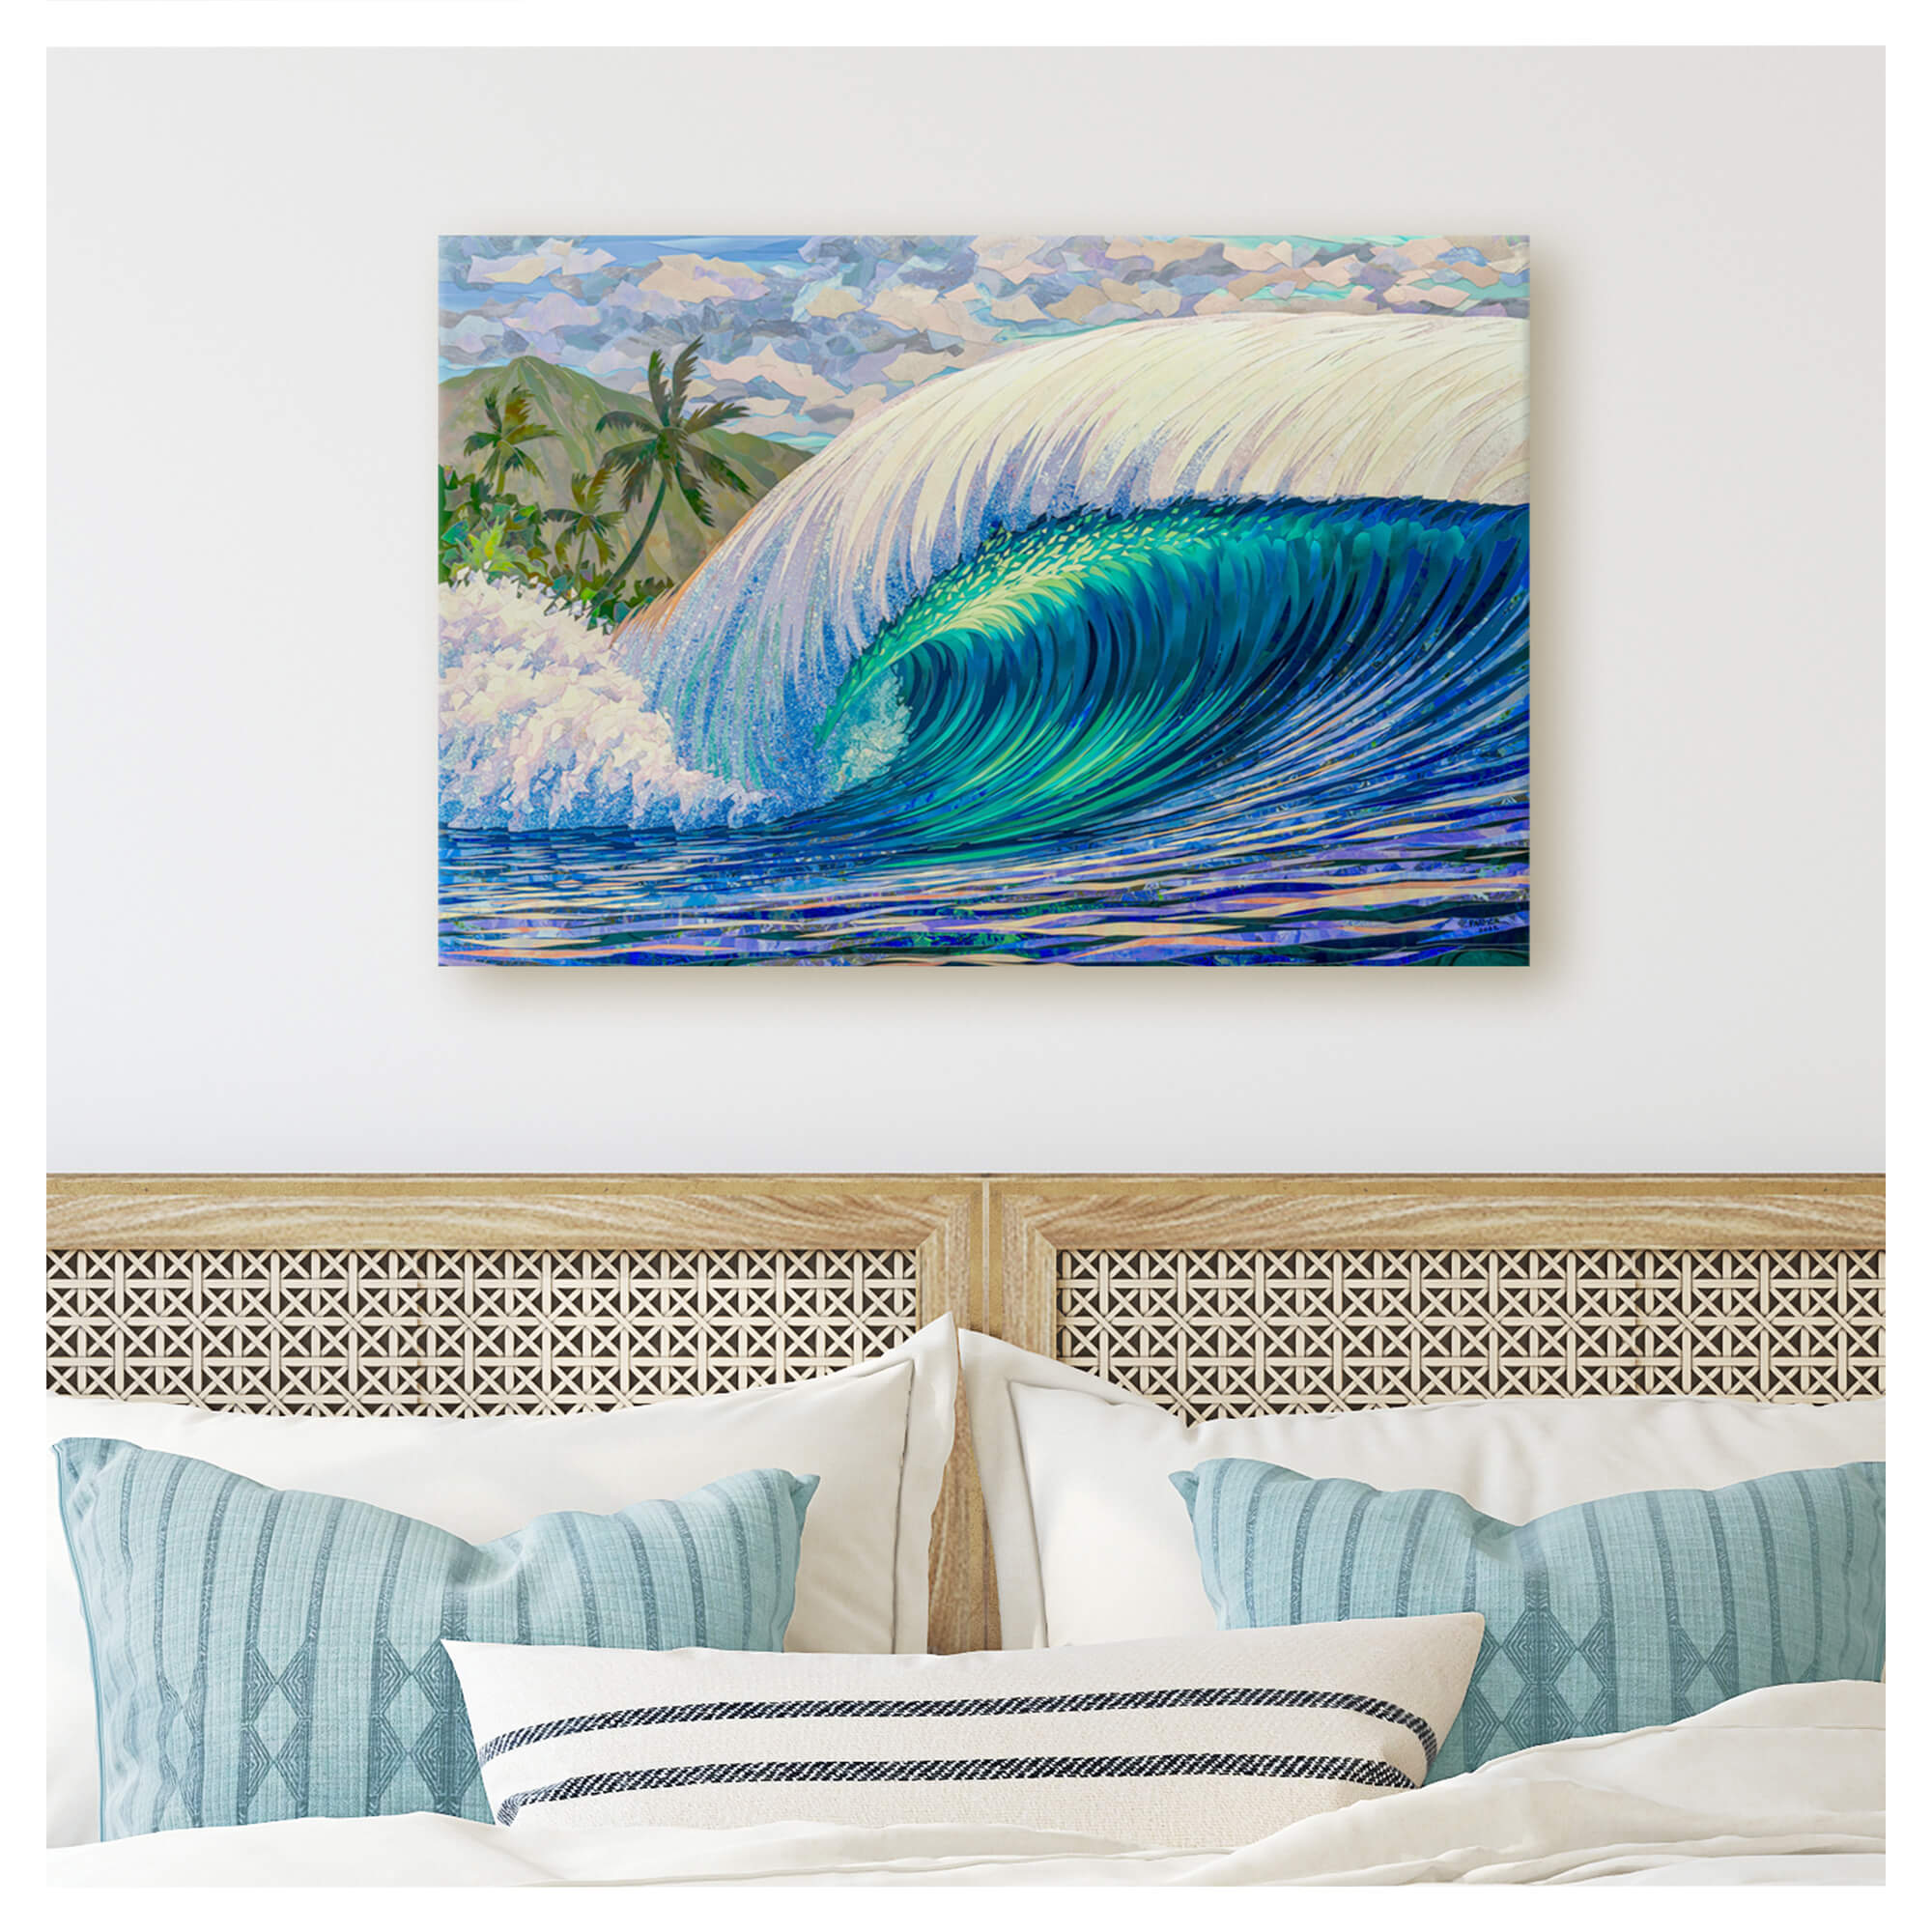 A canvas giclée art print featuring a collage of a large colorful rolling wave and a beautiful mountain background by Hawaii artist Patrick Parker